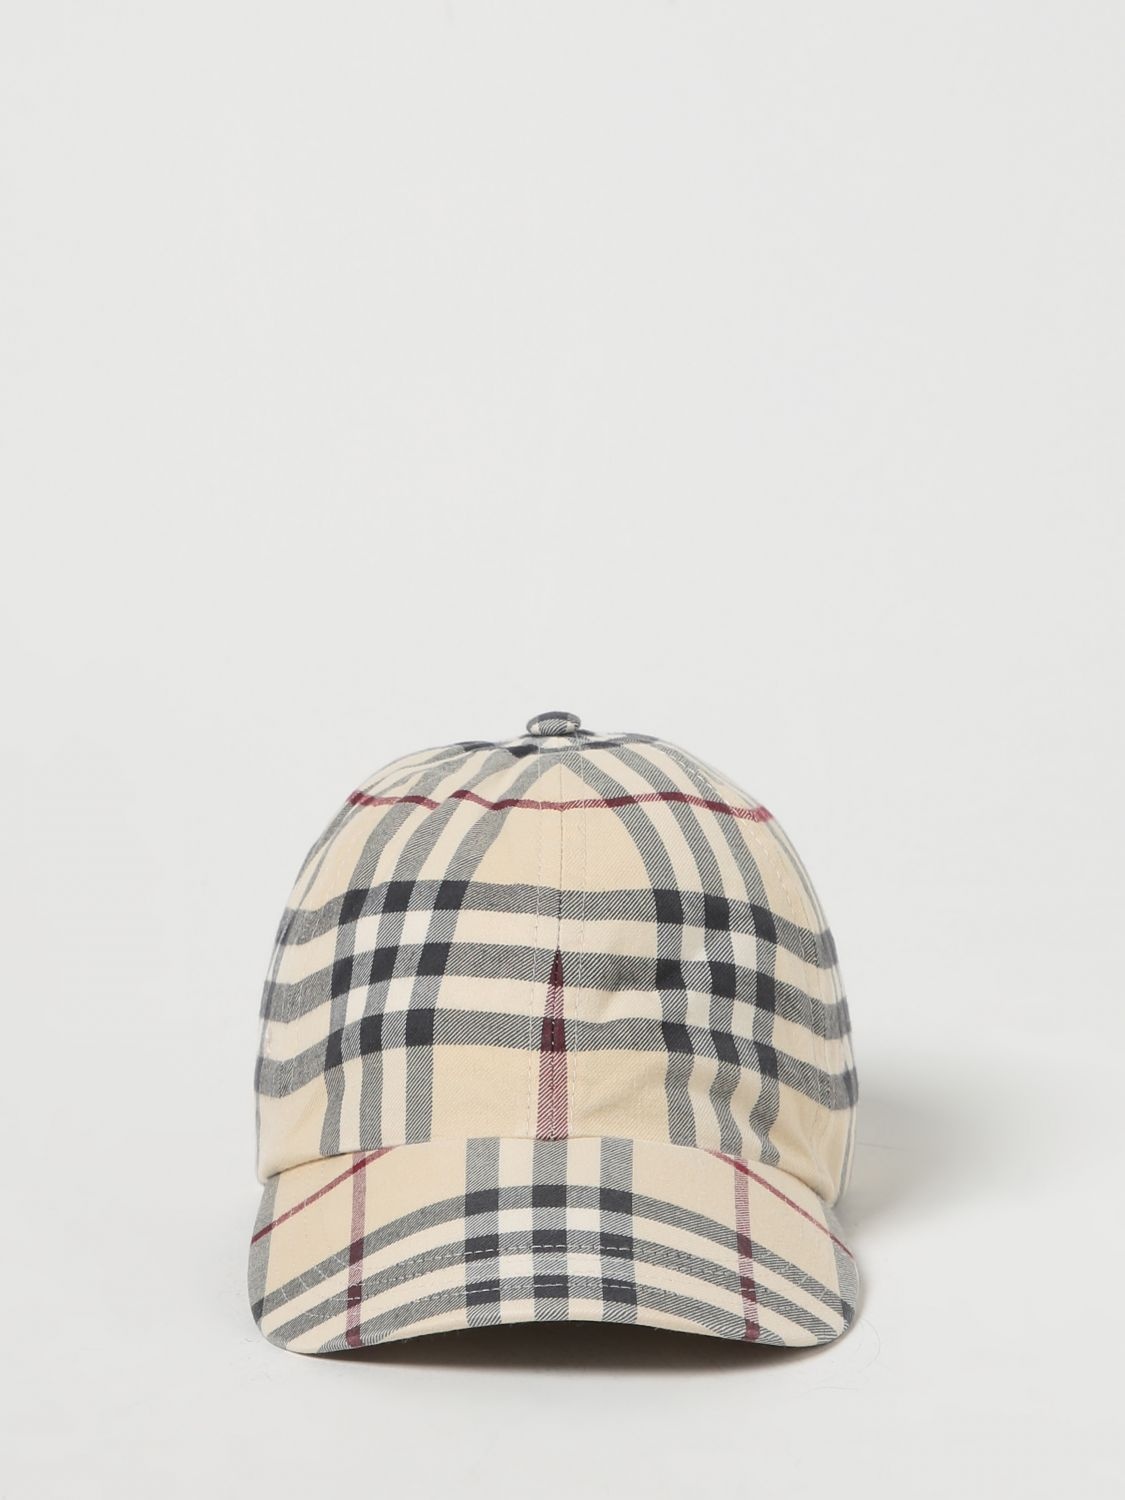 Burberry Vintage Check hat in jacquard cotton - 2